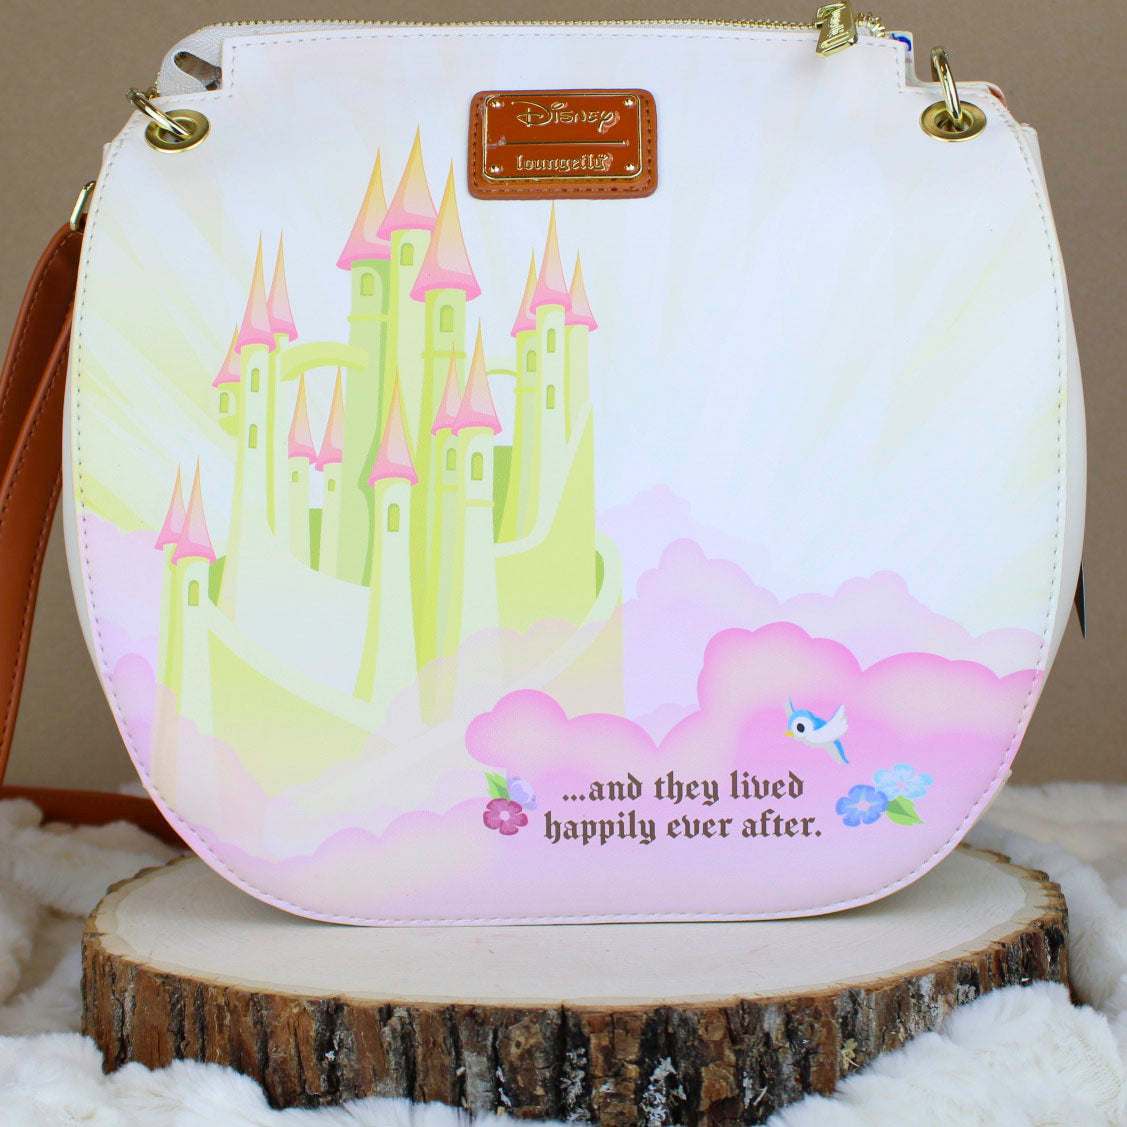 Buy Cinderella Happily Ever After Crossbody Bag at Loungefly.